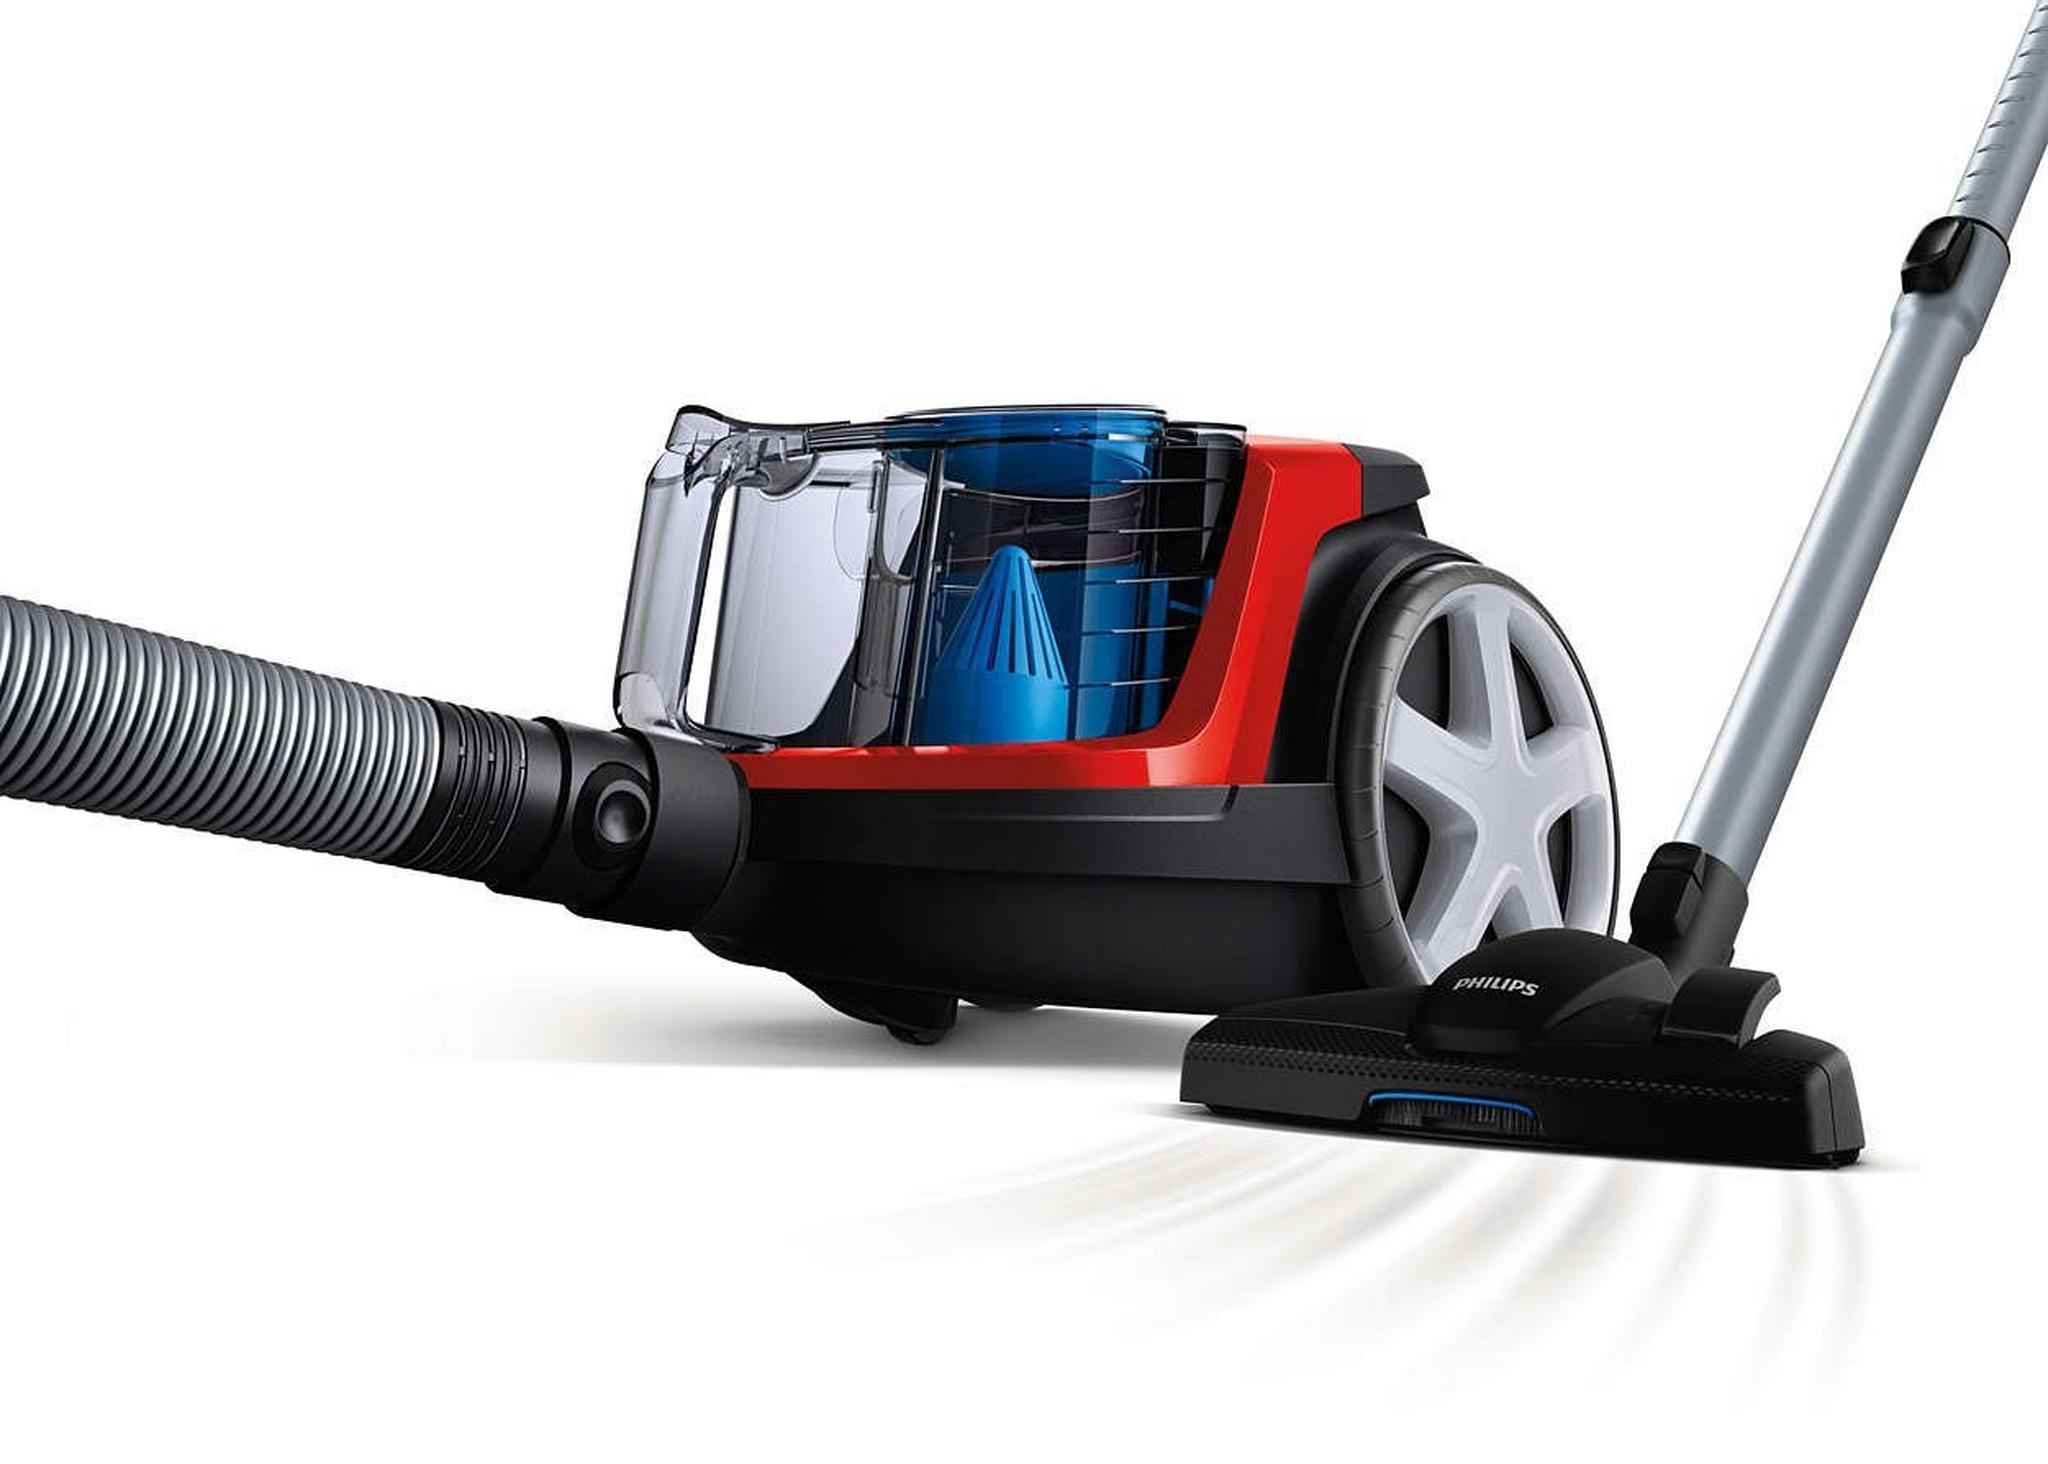 Philips  PowerPro Compact Bagless Vacuum Cleaner,1900 W, 1.5 Litre, FC9351 - Sporty Red